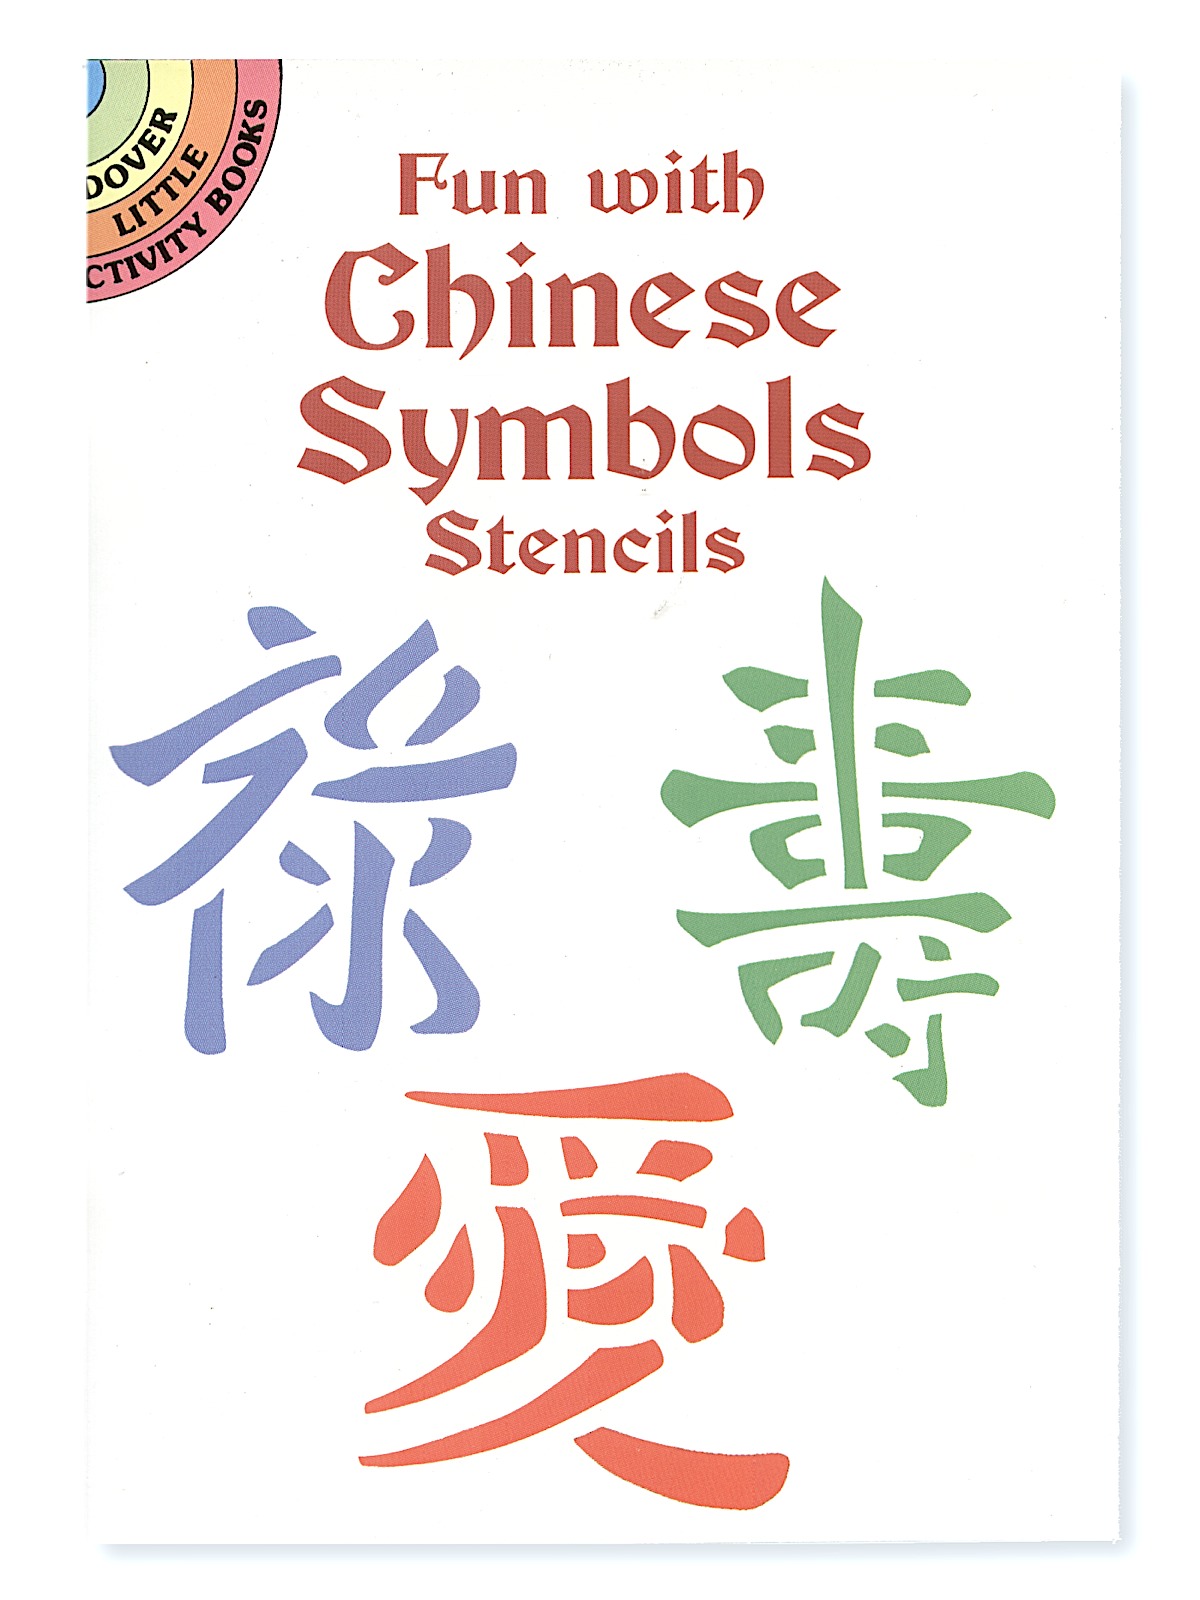 Fun With Chinese Symbols Stencils Fun With Chinese Symbols Stencils